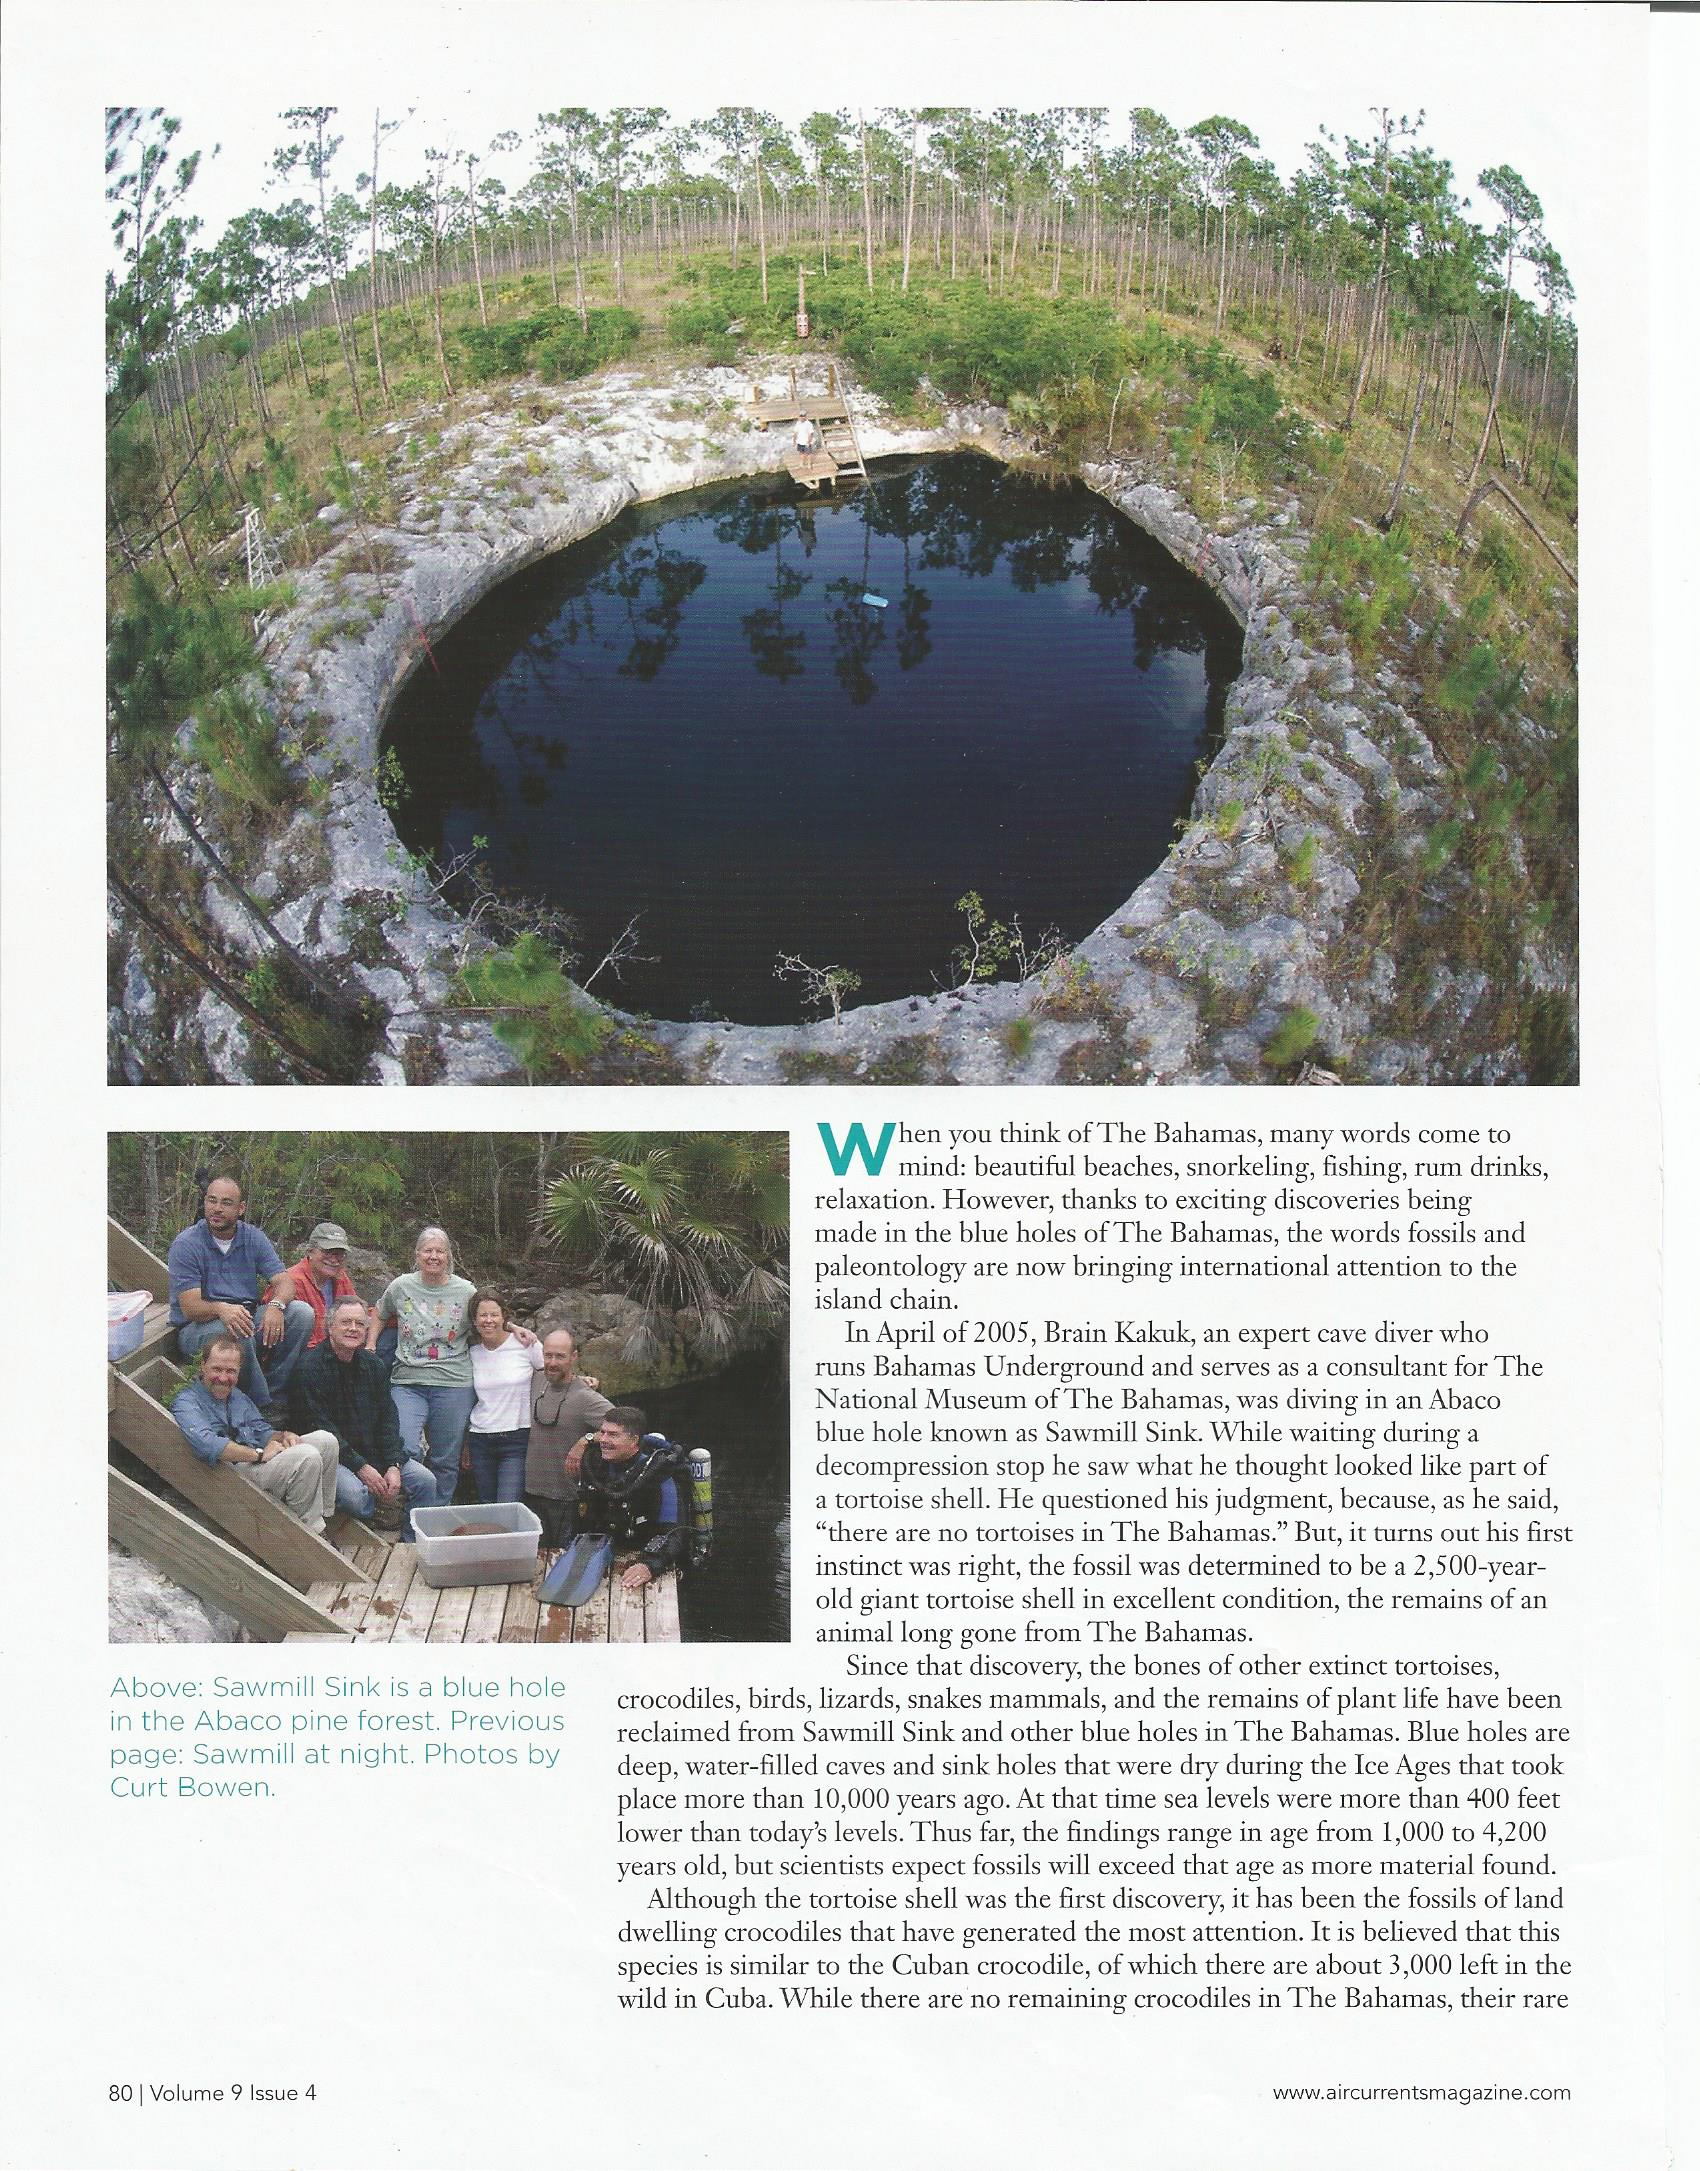 South Abaco Blue Holes National Park Established August 31